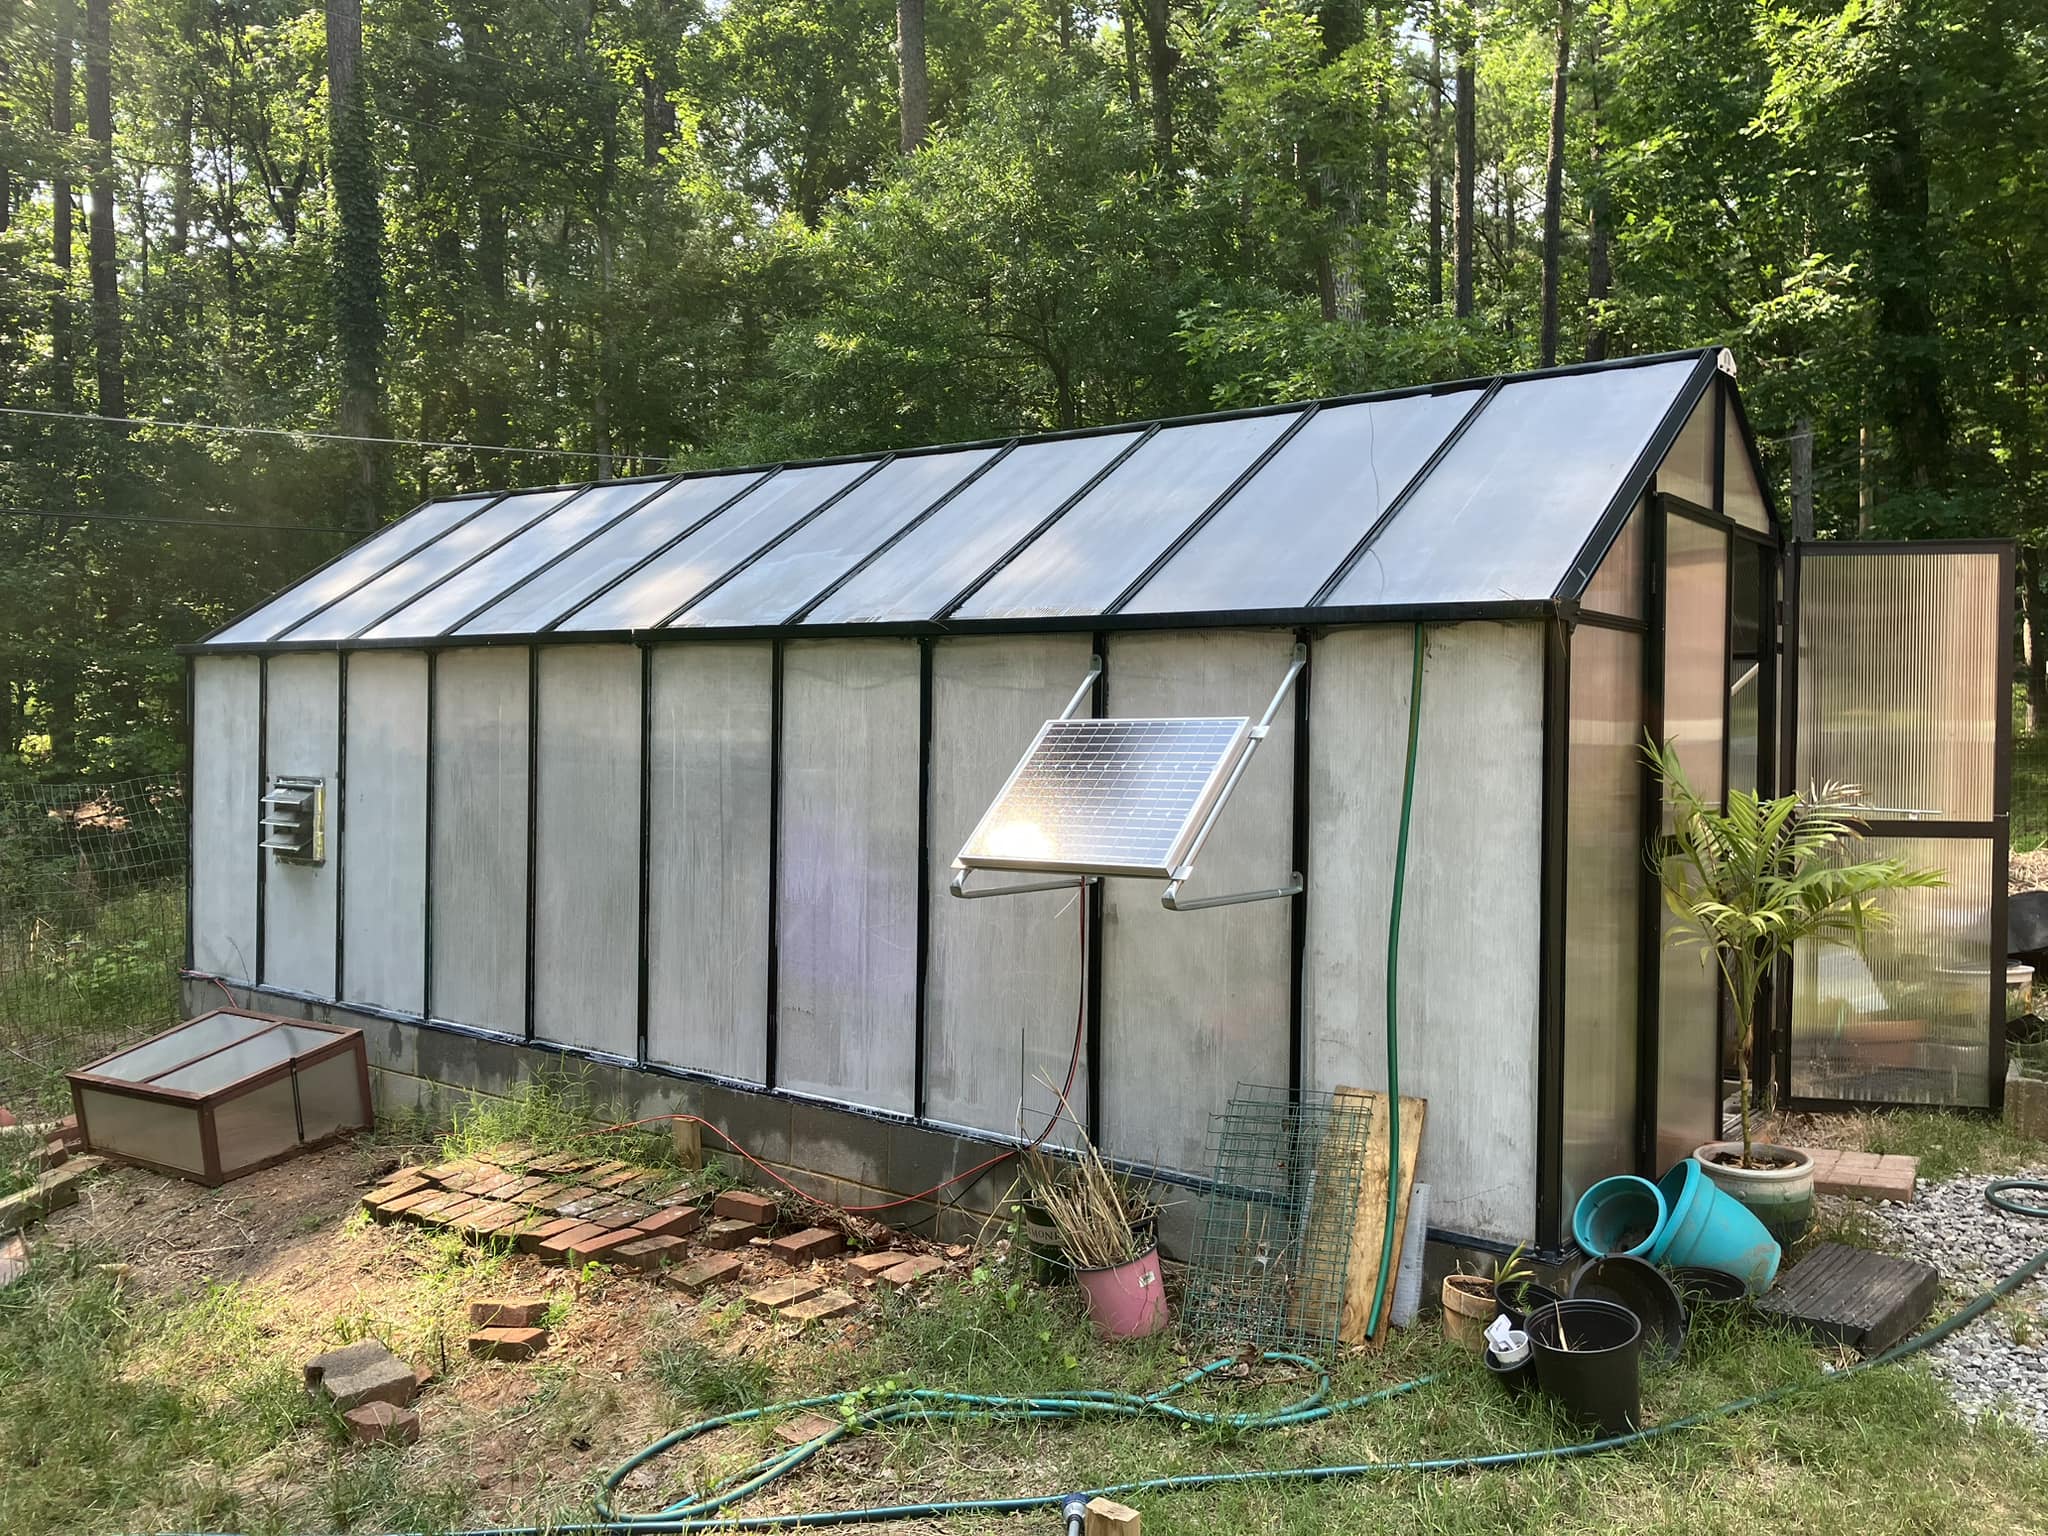 Monticello Greenhouse - [Exclusive] MONT™  8x8x20.ft Greenhouse DTG Edition